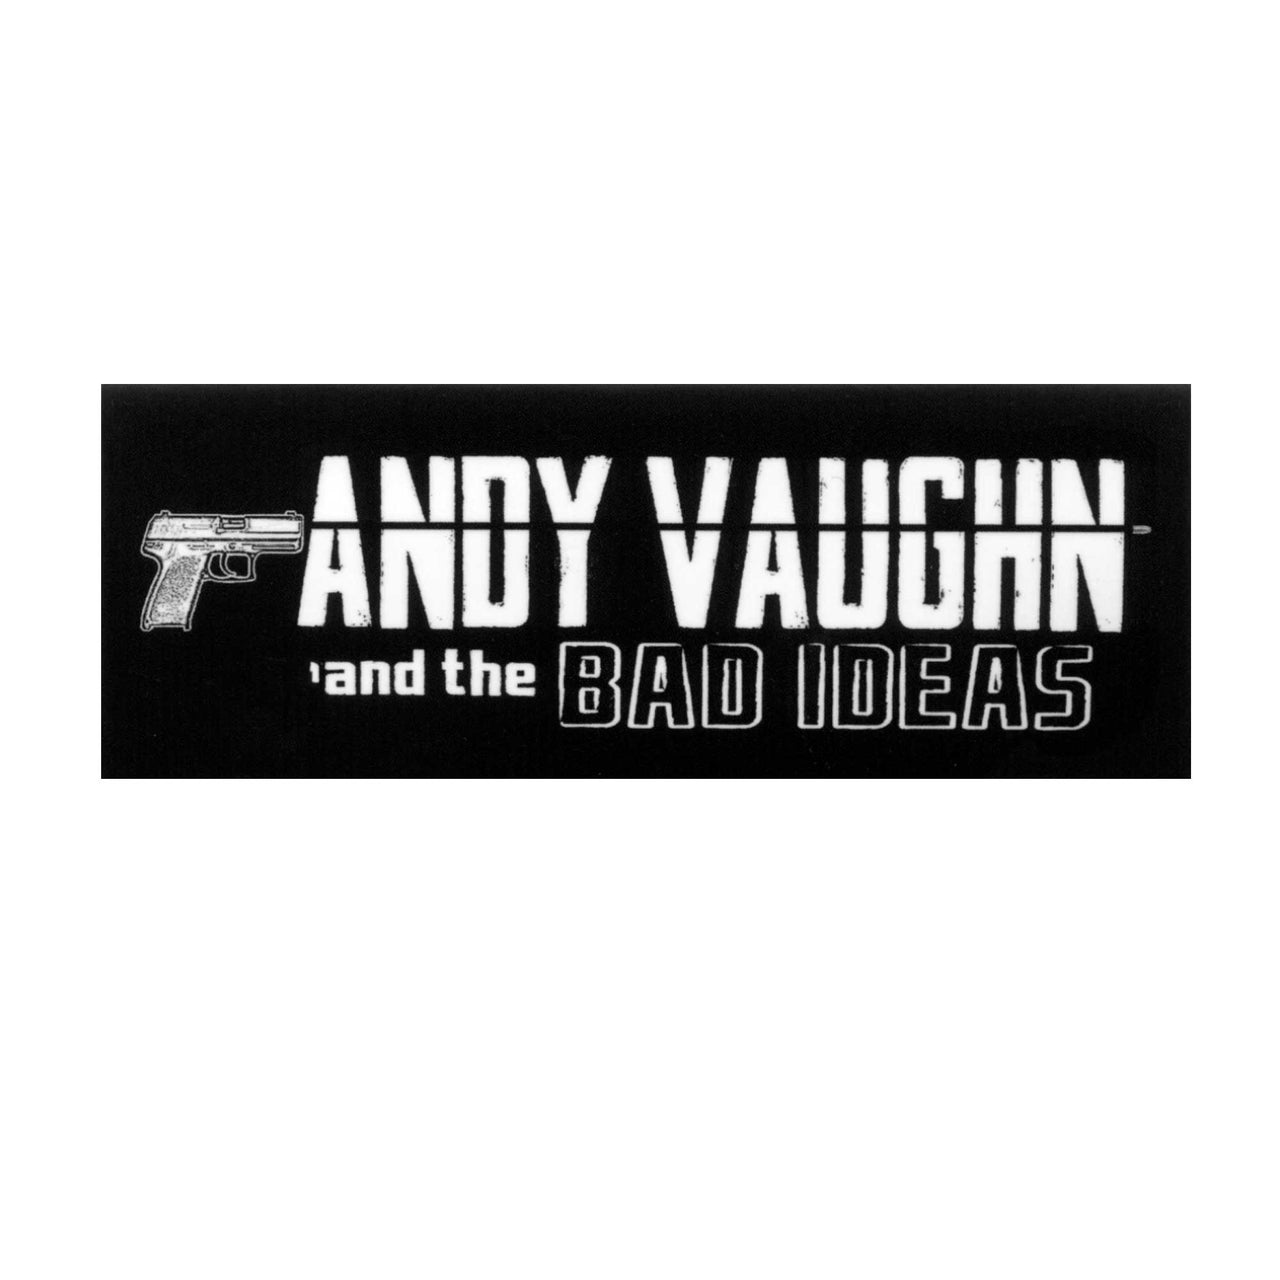 ANDY VAUGHN AND THE BAD IDEAS STICKER